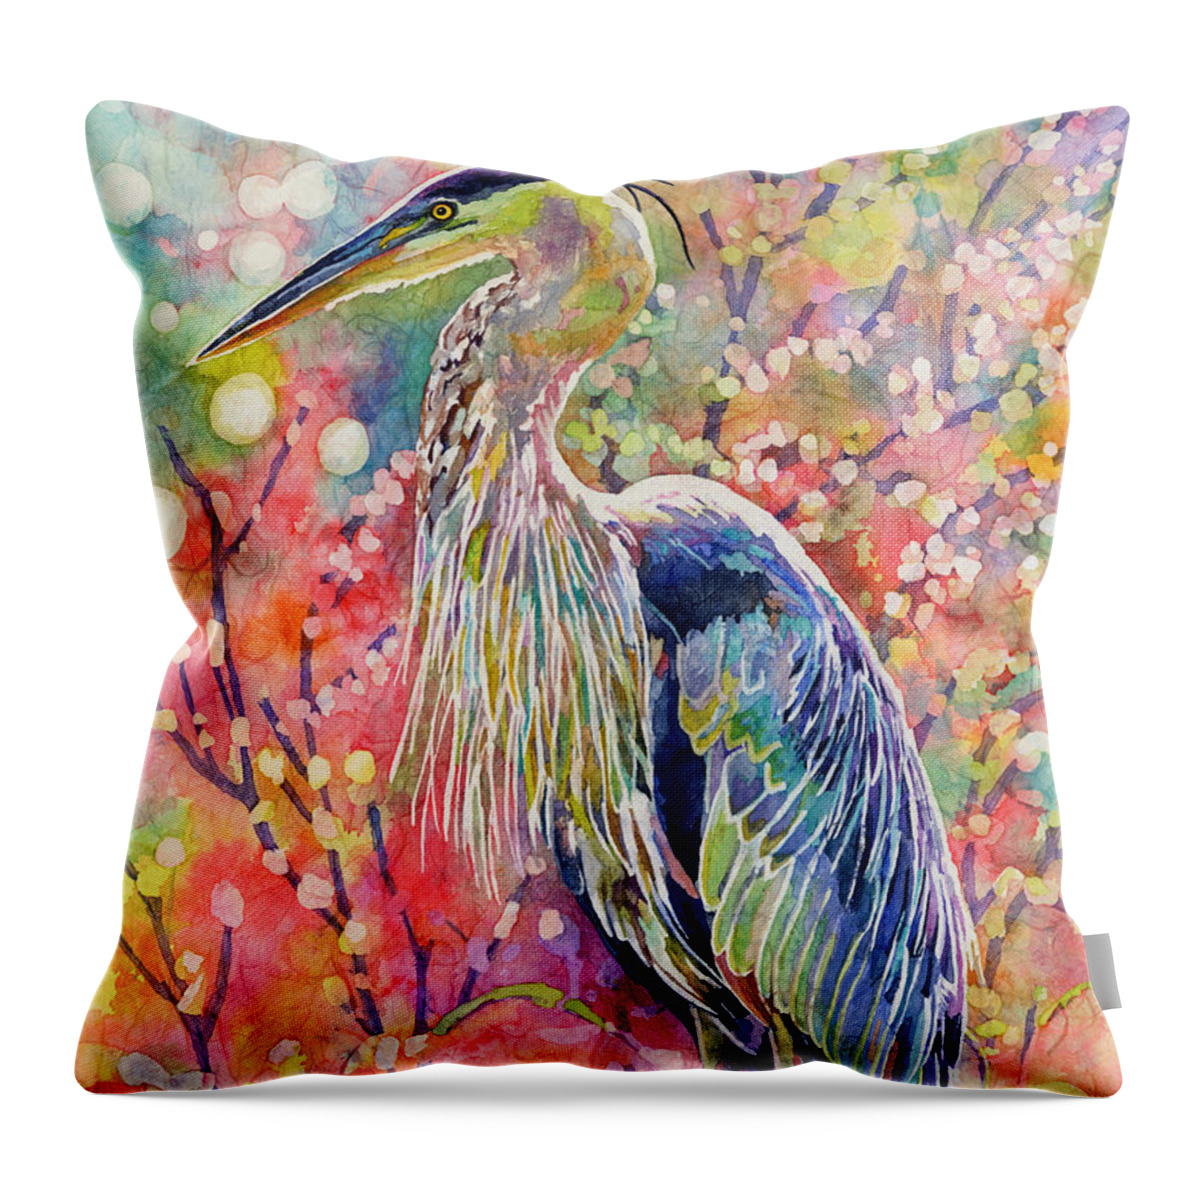 Heron Throw Pillow featuring the painting Elegant Repose by Hailey E Herrera